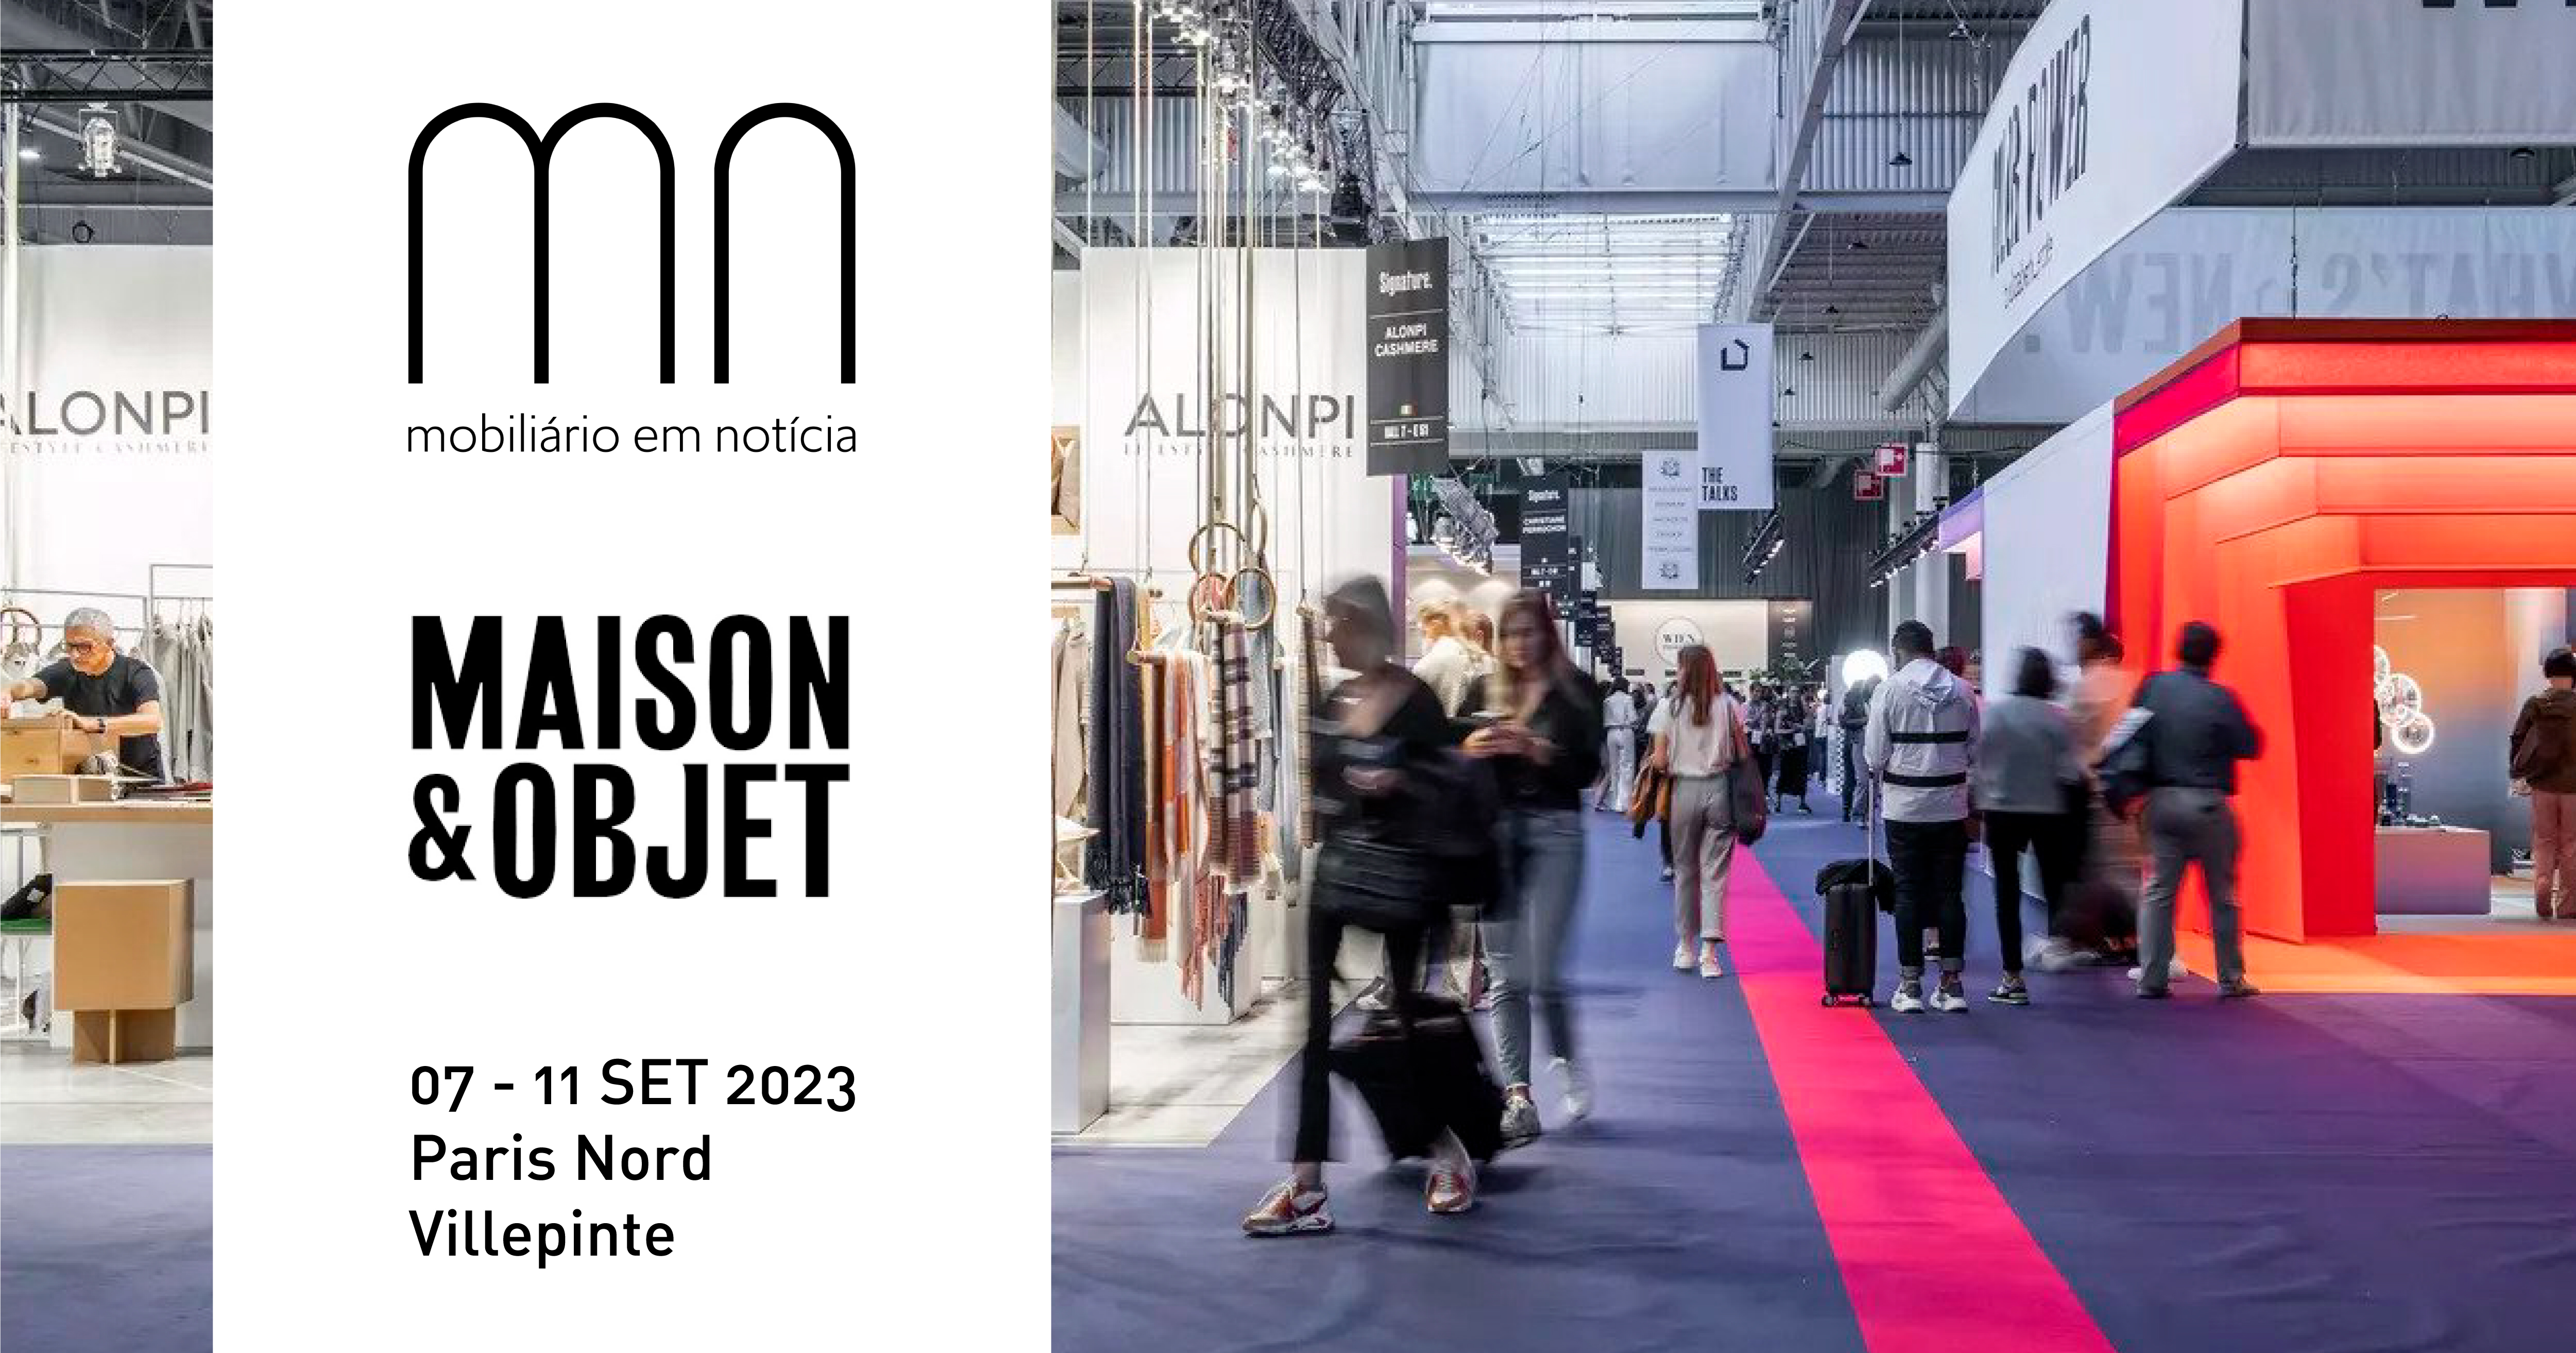 Maison & Objet opens its doors from September 7th to 11th